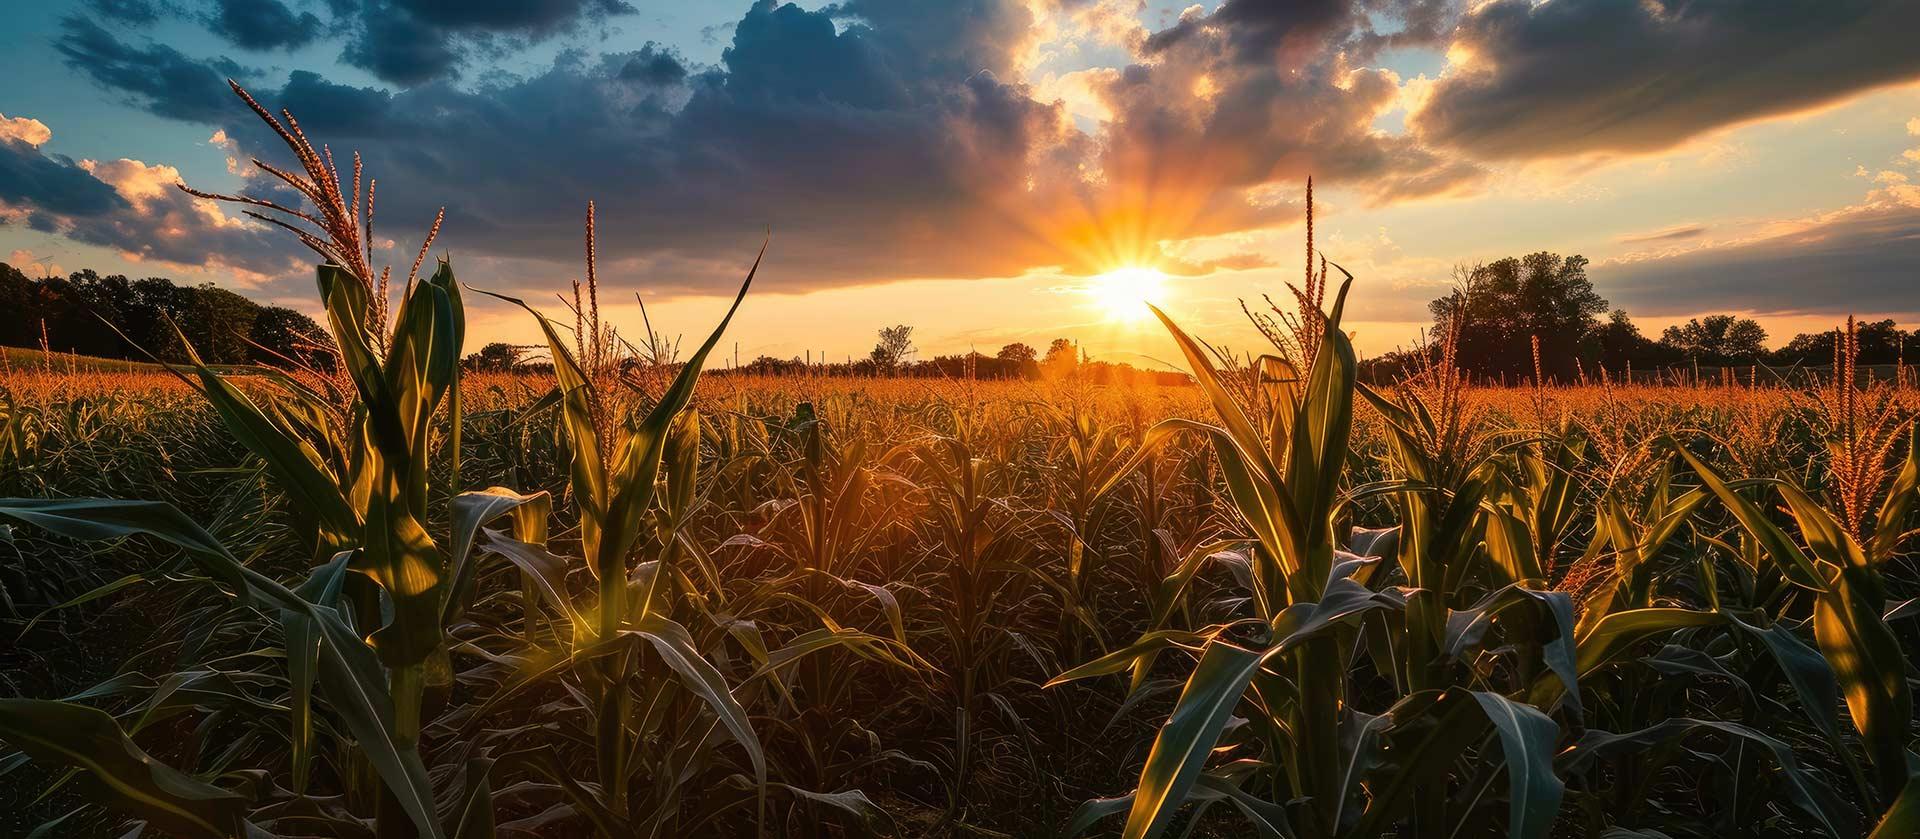 Sunset at the Cornfield in Ohio During the Summer